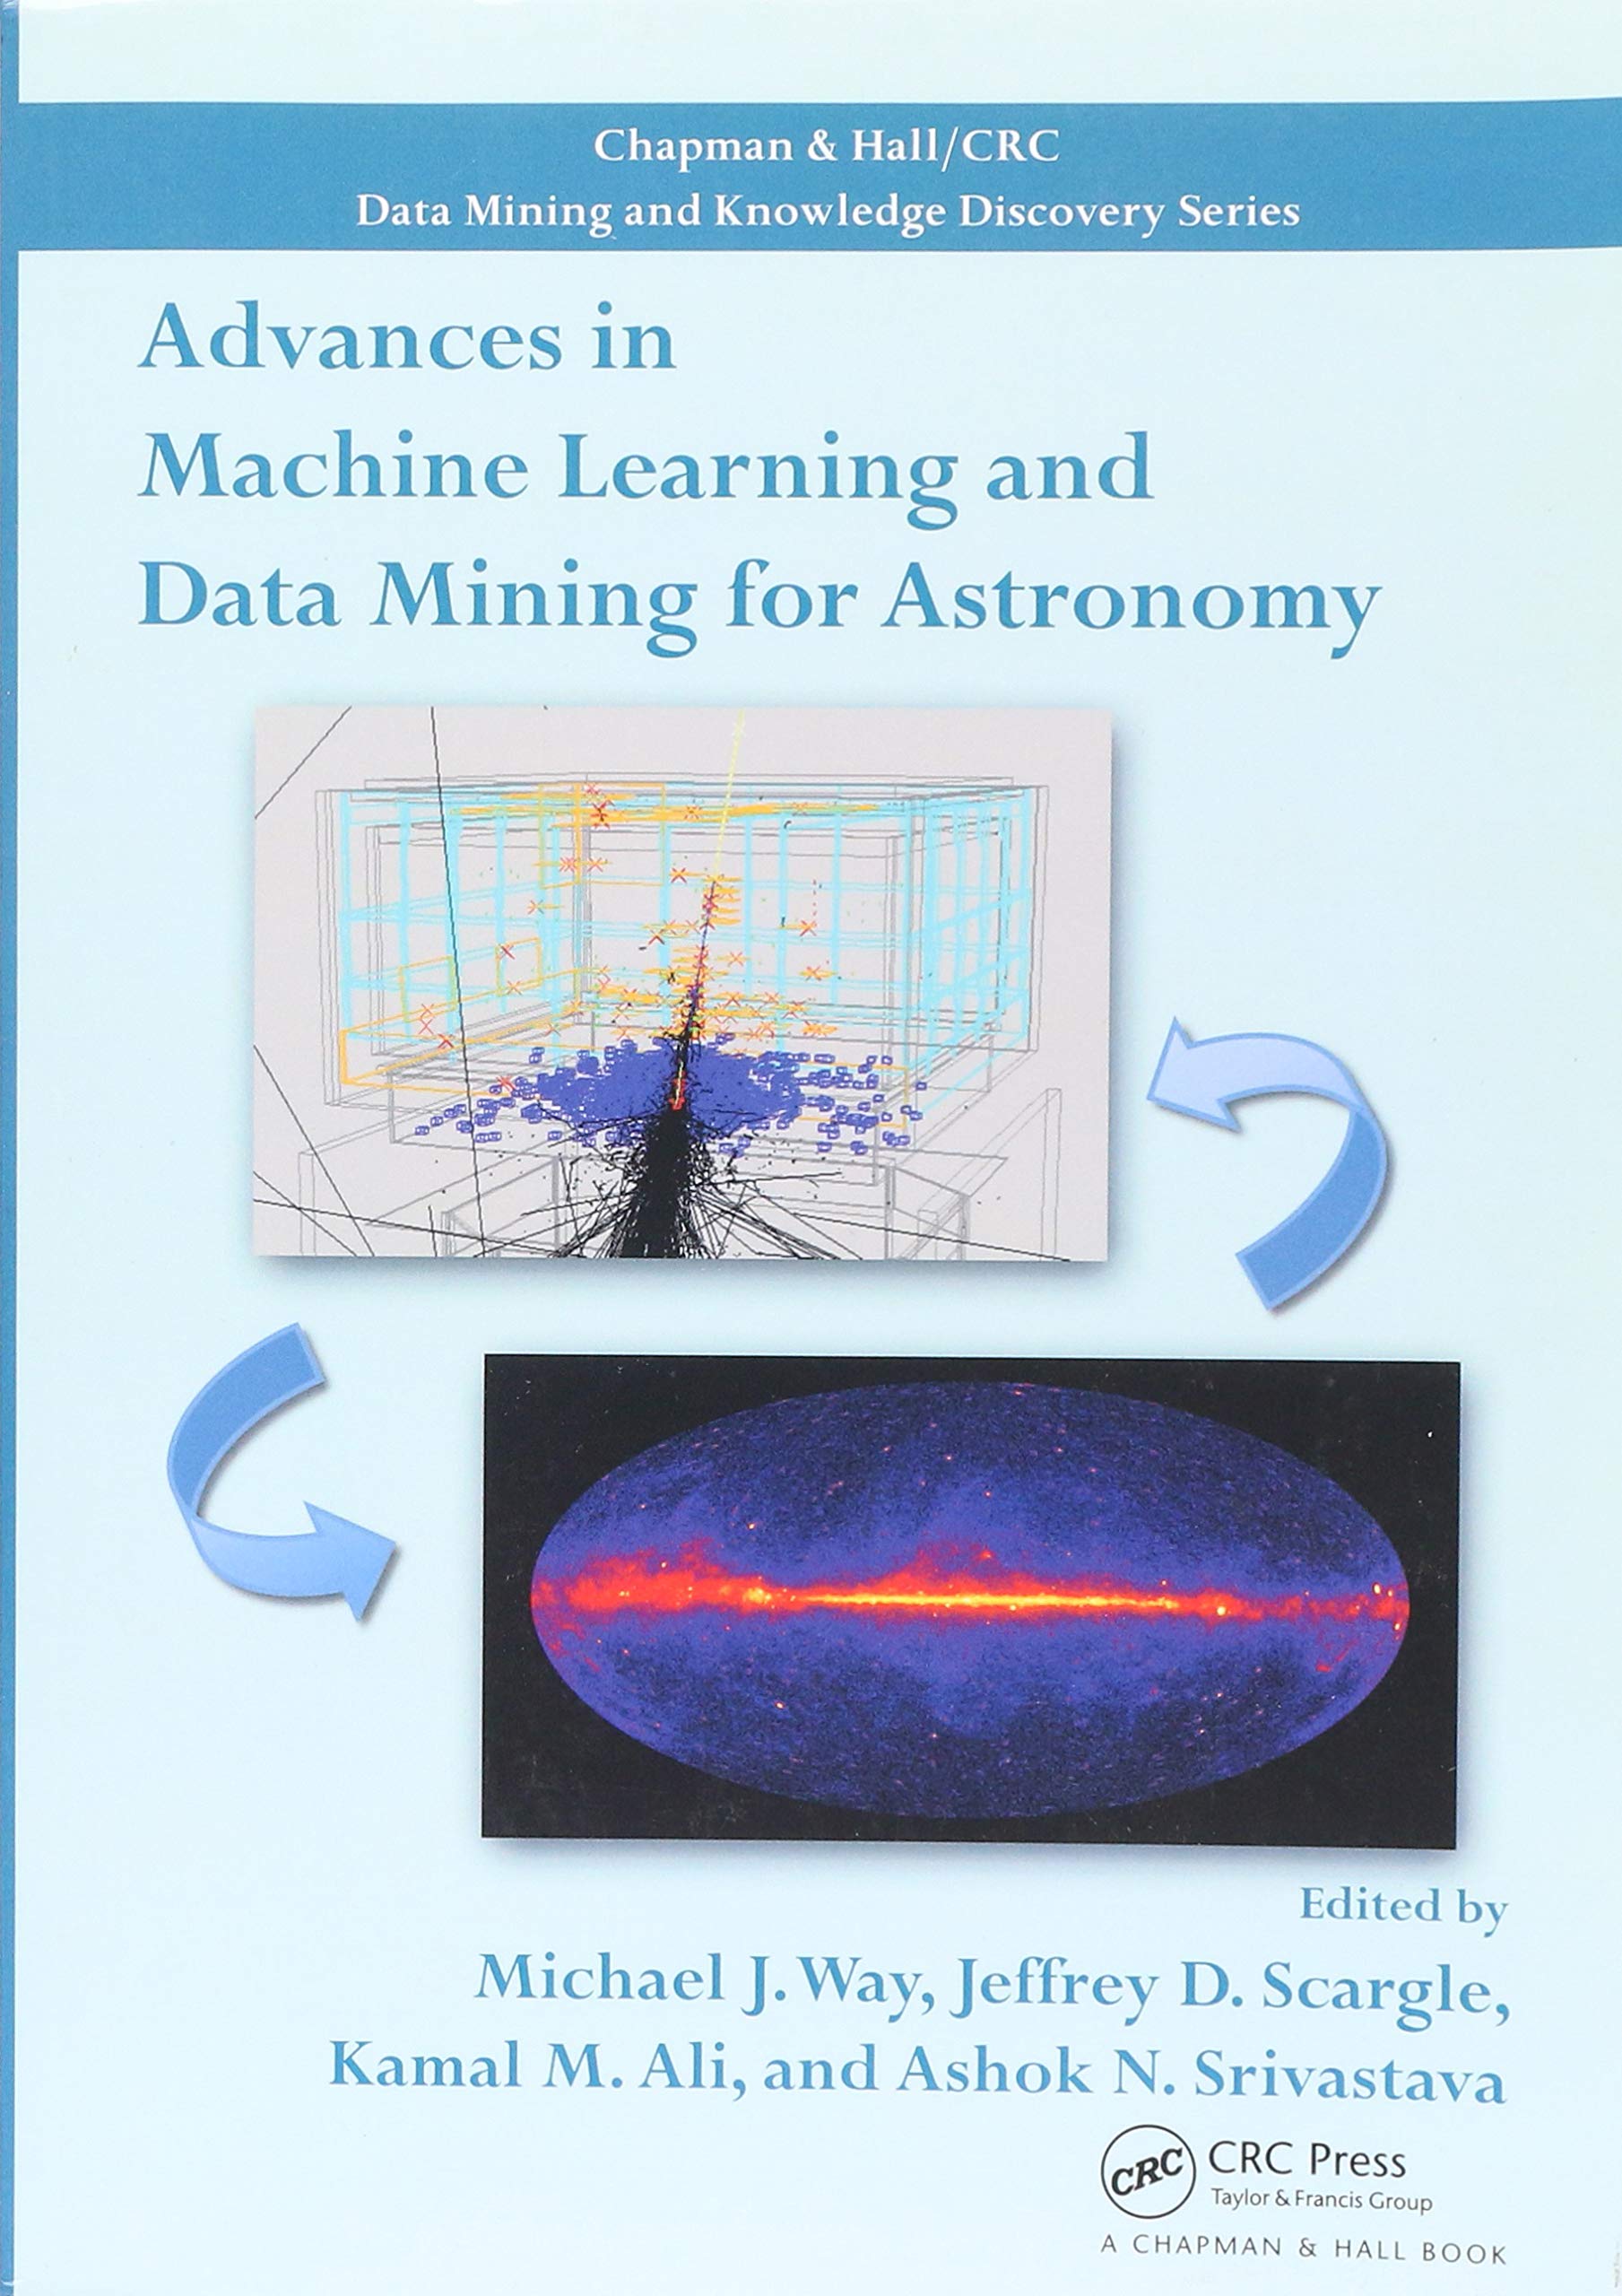 Advances in Machine Learning and Data Mining for Astronomy by Michael J. Way, Jeffrey D. Scargle, Kamal M. Ali, Ashok N. Srivastava - (IG@rkebooks)